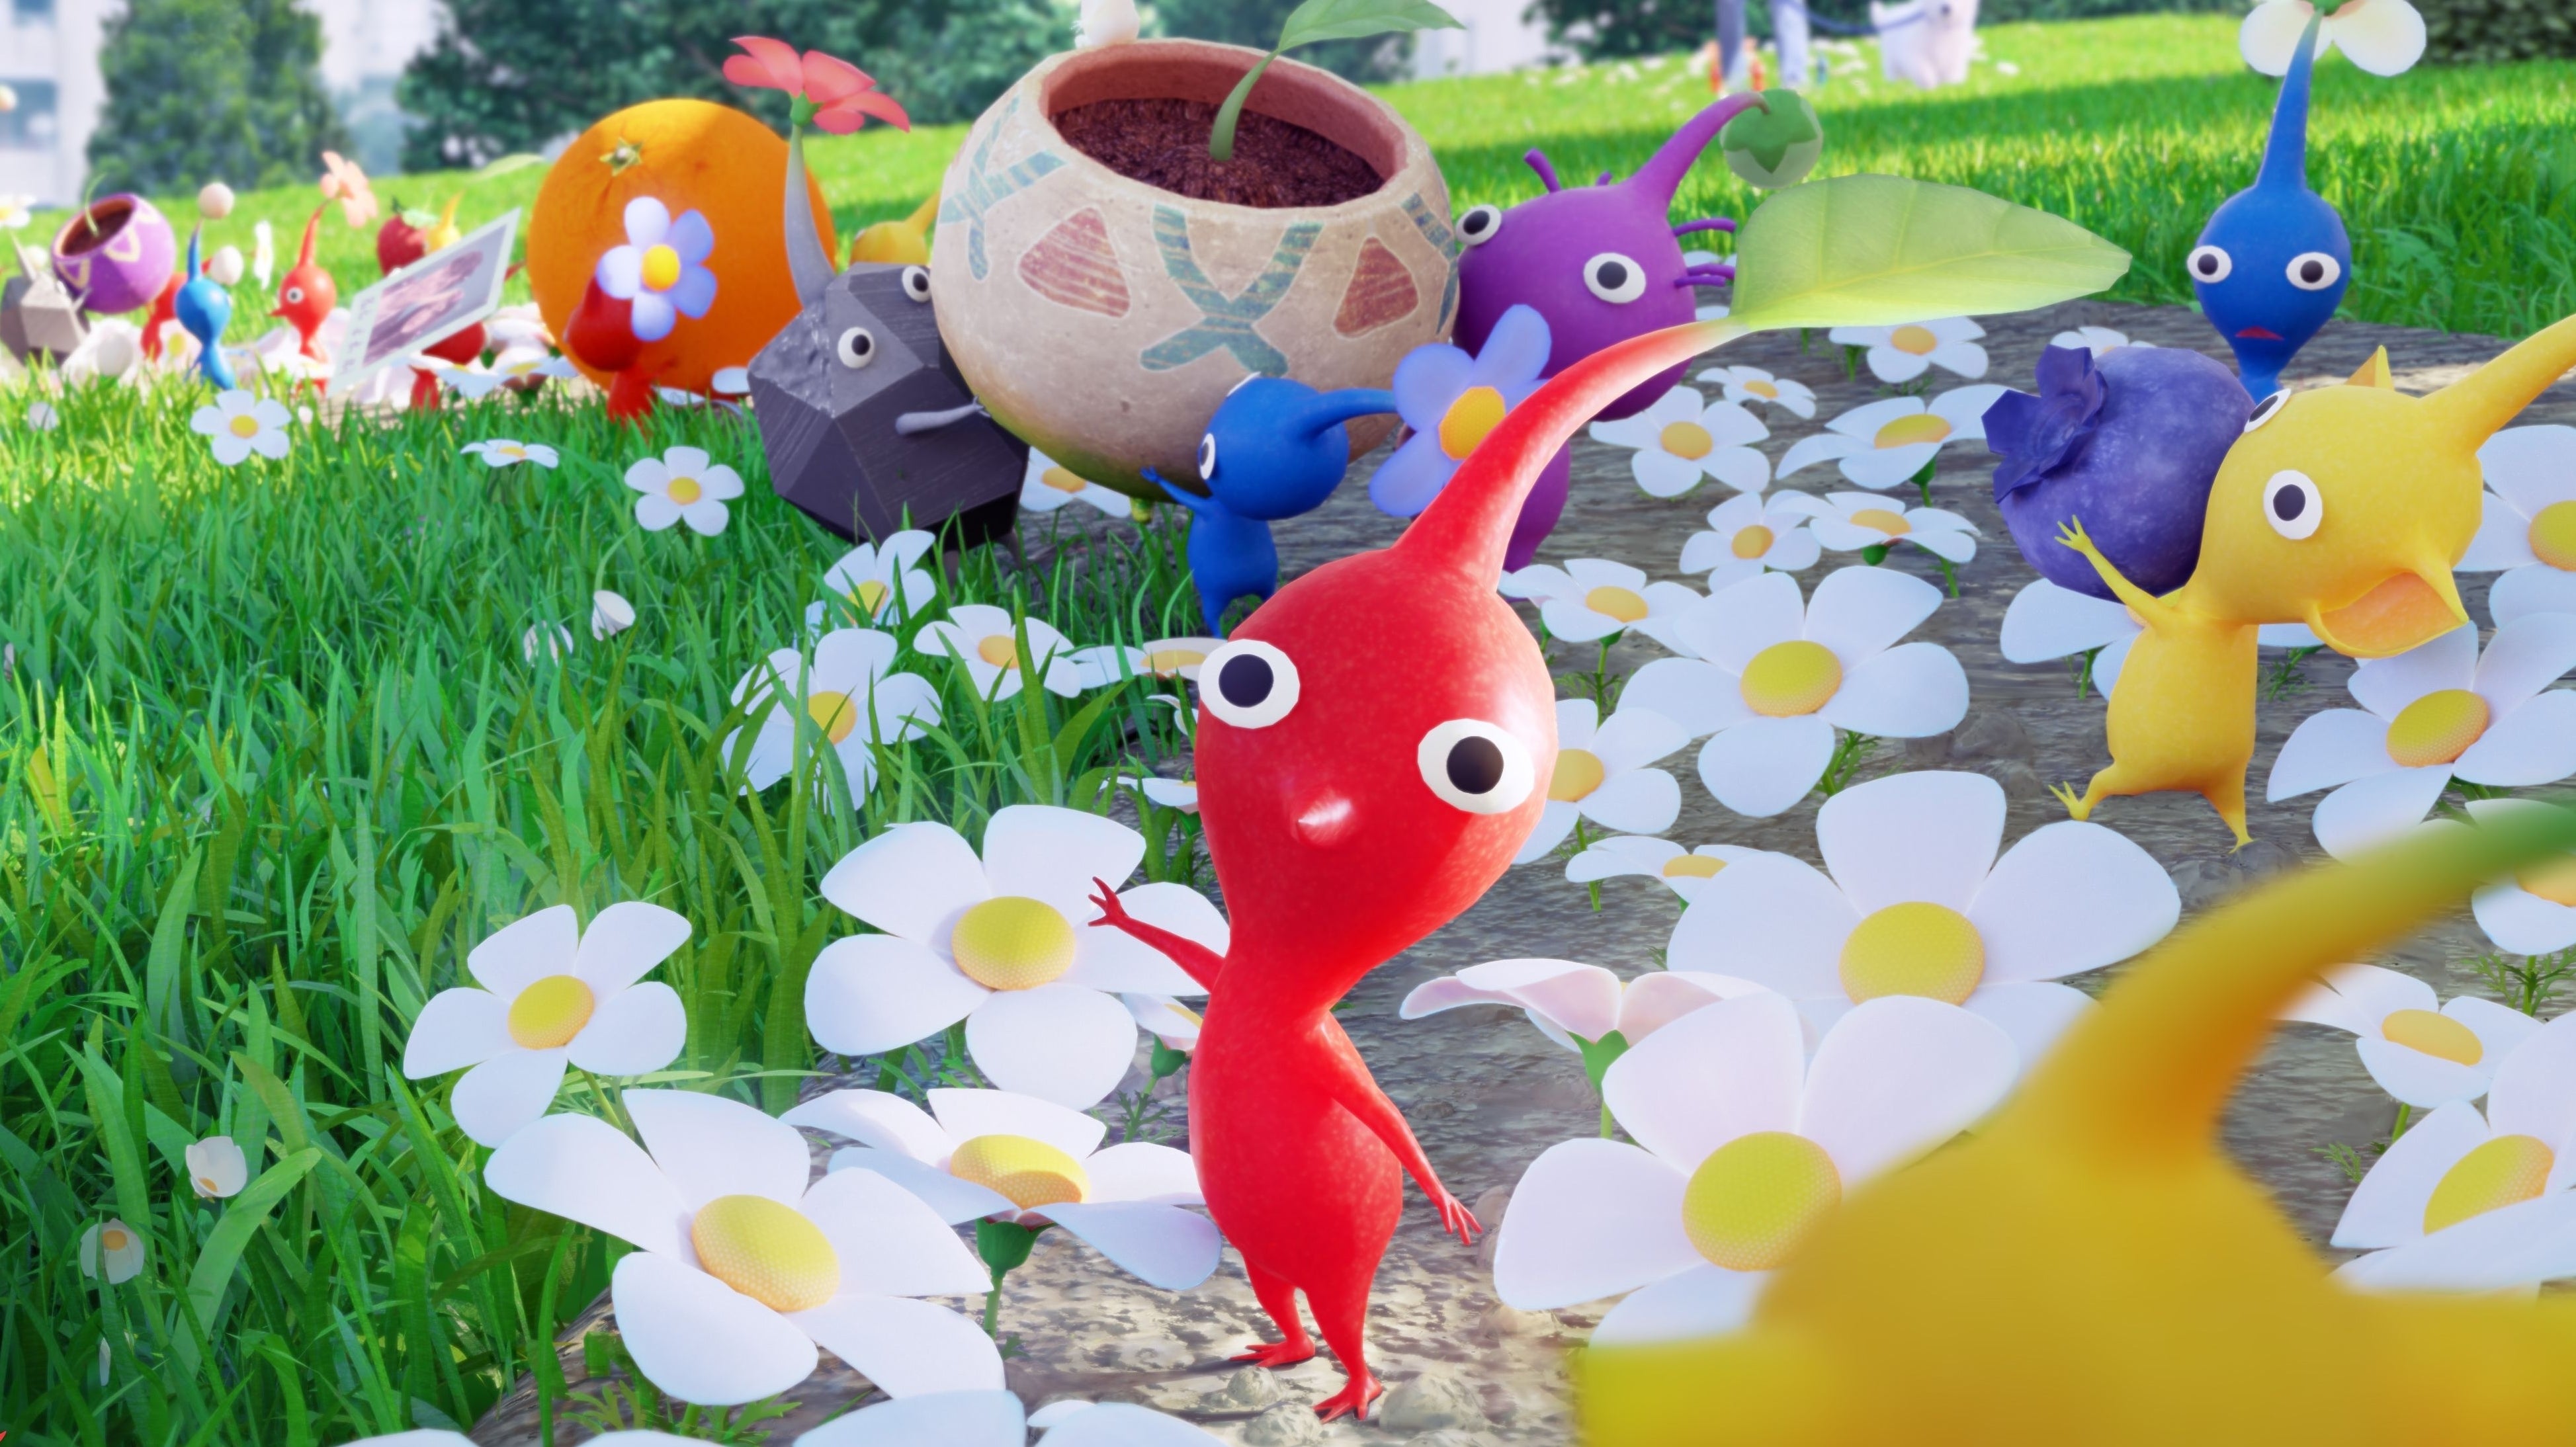 Image for Pikmin Bloom release date: When is Pikmin Bloom releasing in the UK, US and worldwide?